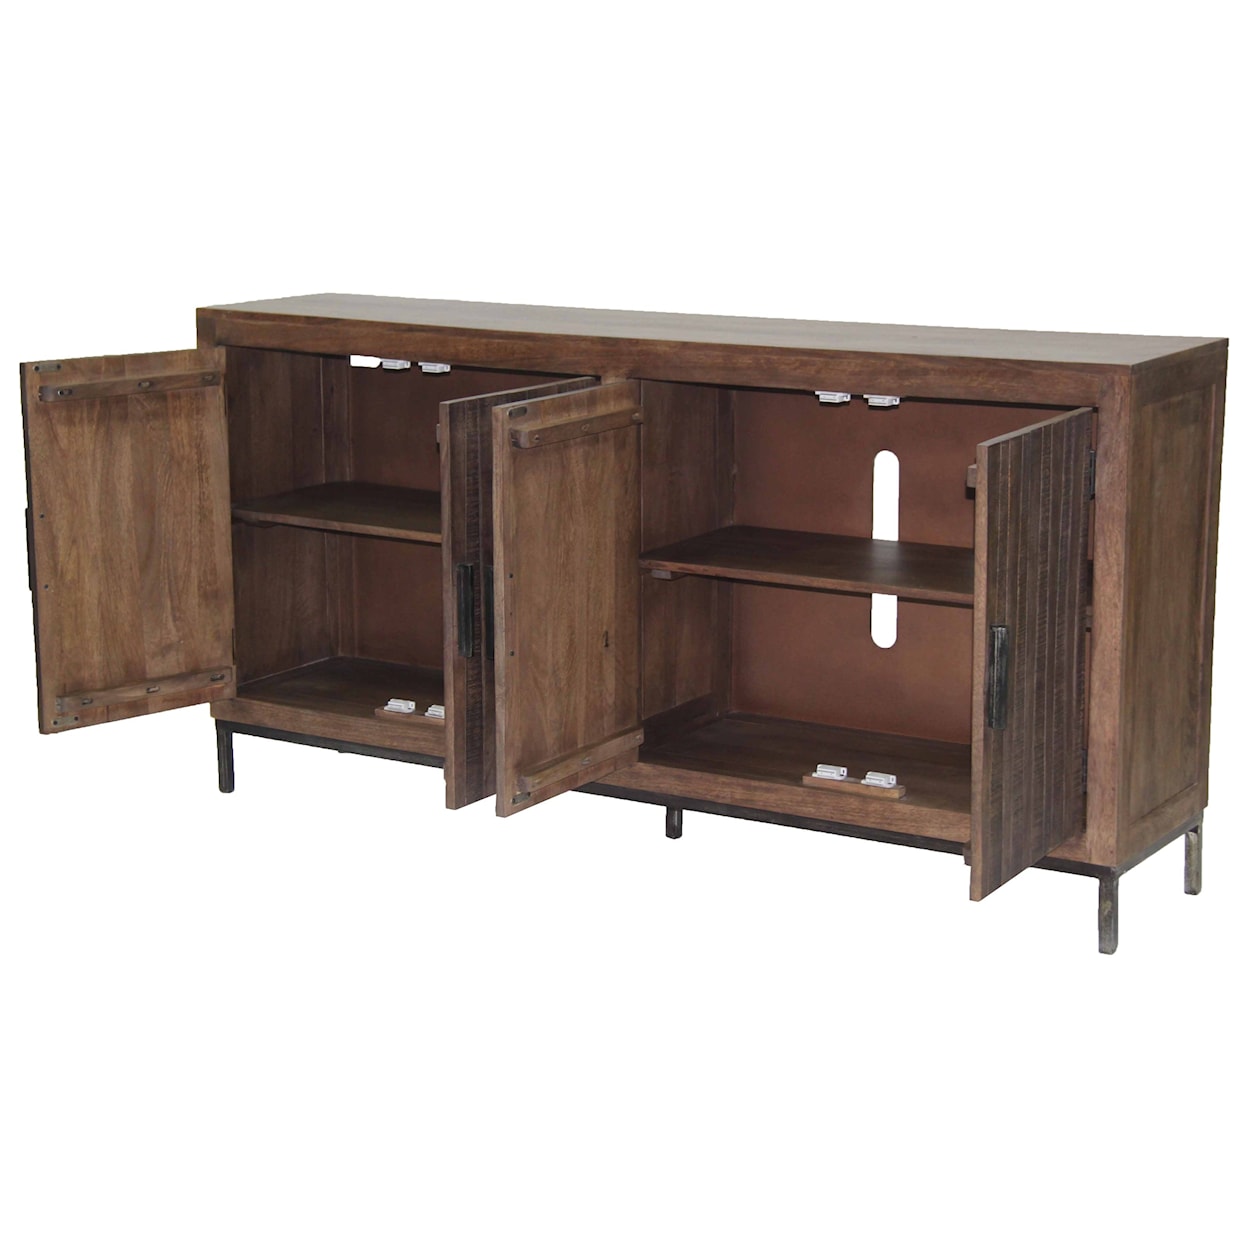 Paramount Furniture Crossings Morocco 78 in. TV Console